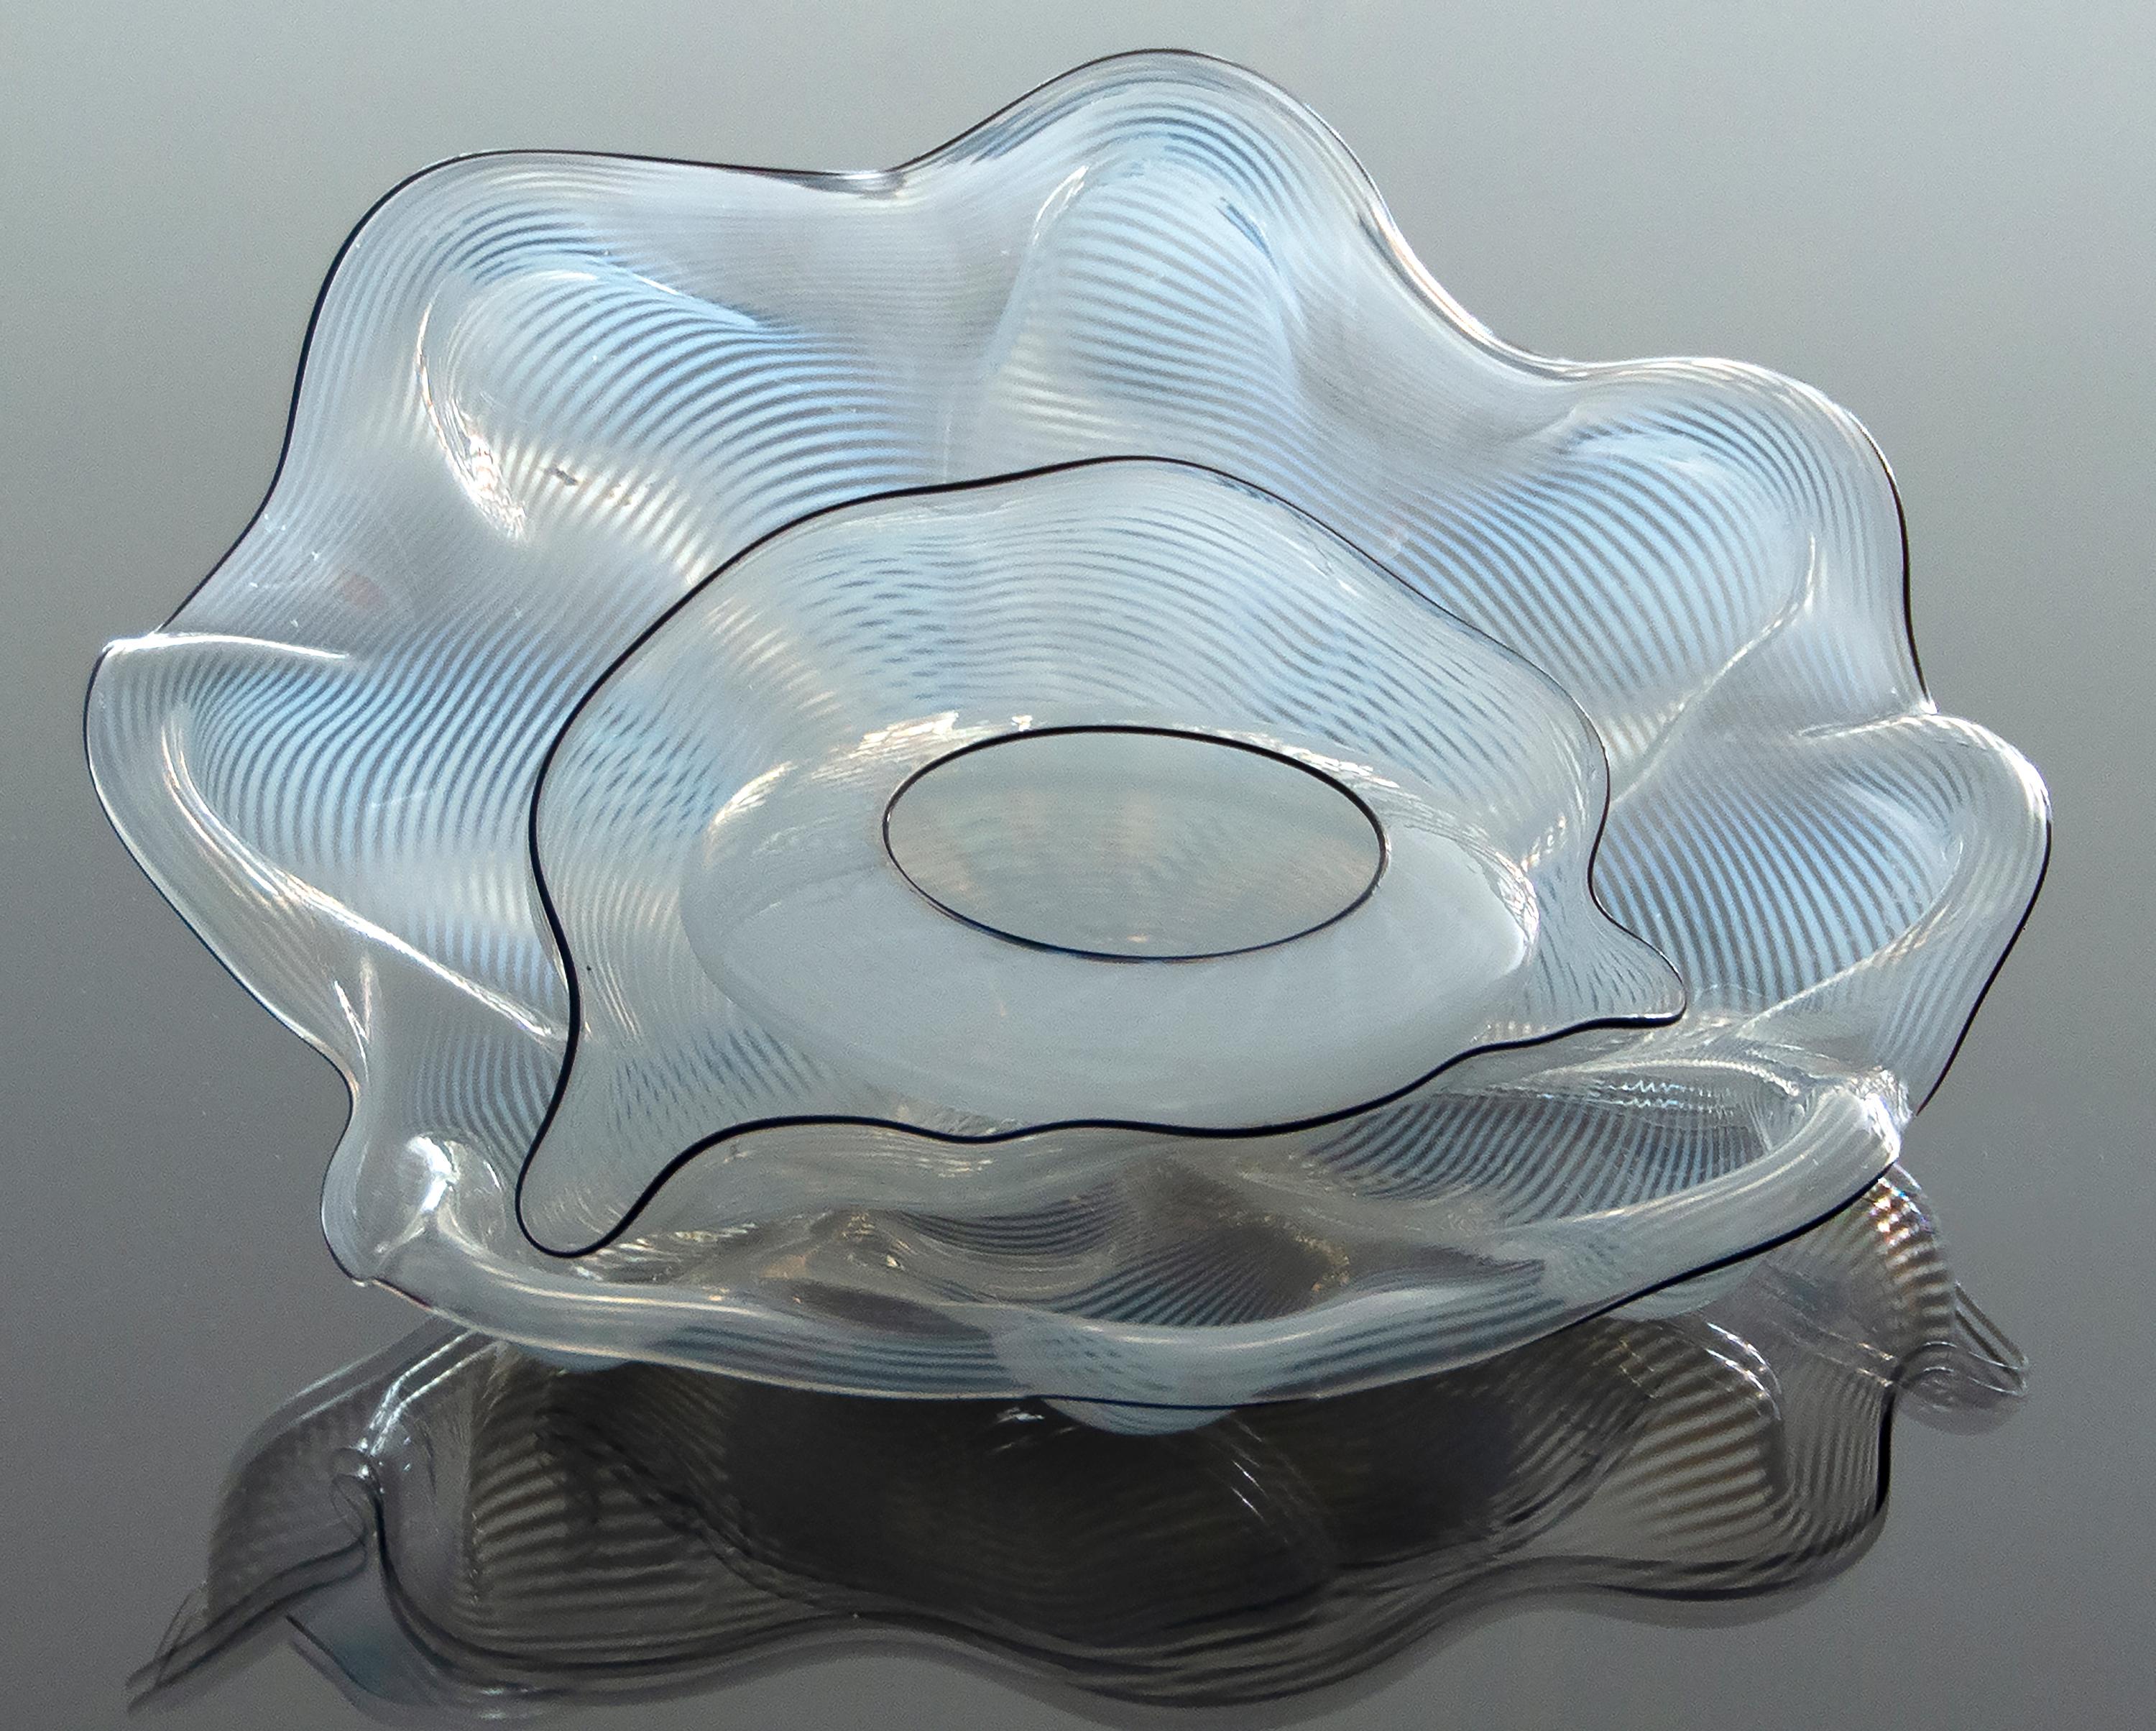 Dale Chihuly Abstract Sculpture - White Seaform with Black Lip Wraps